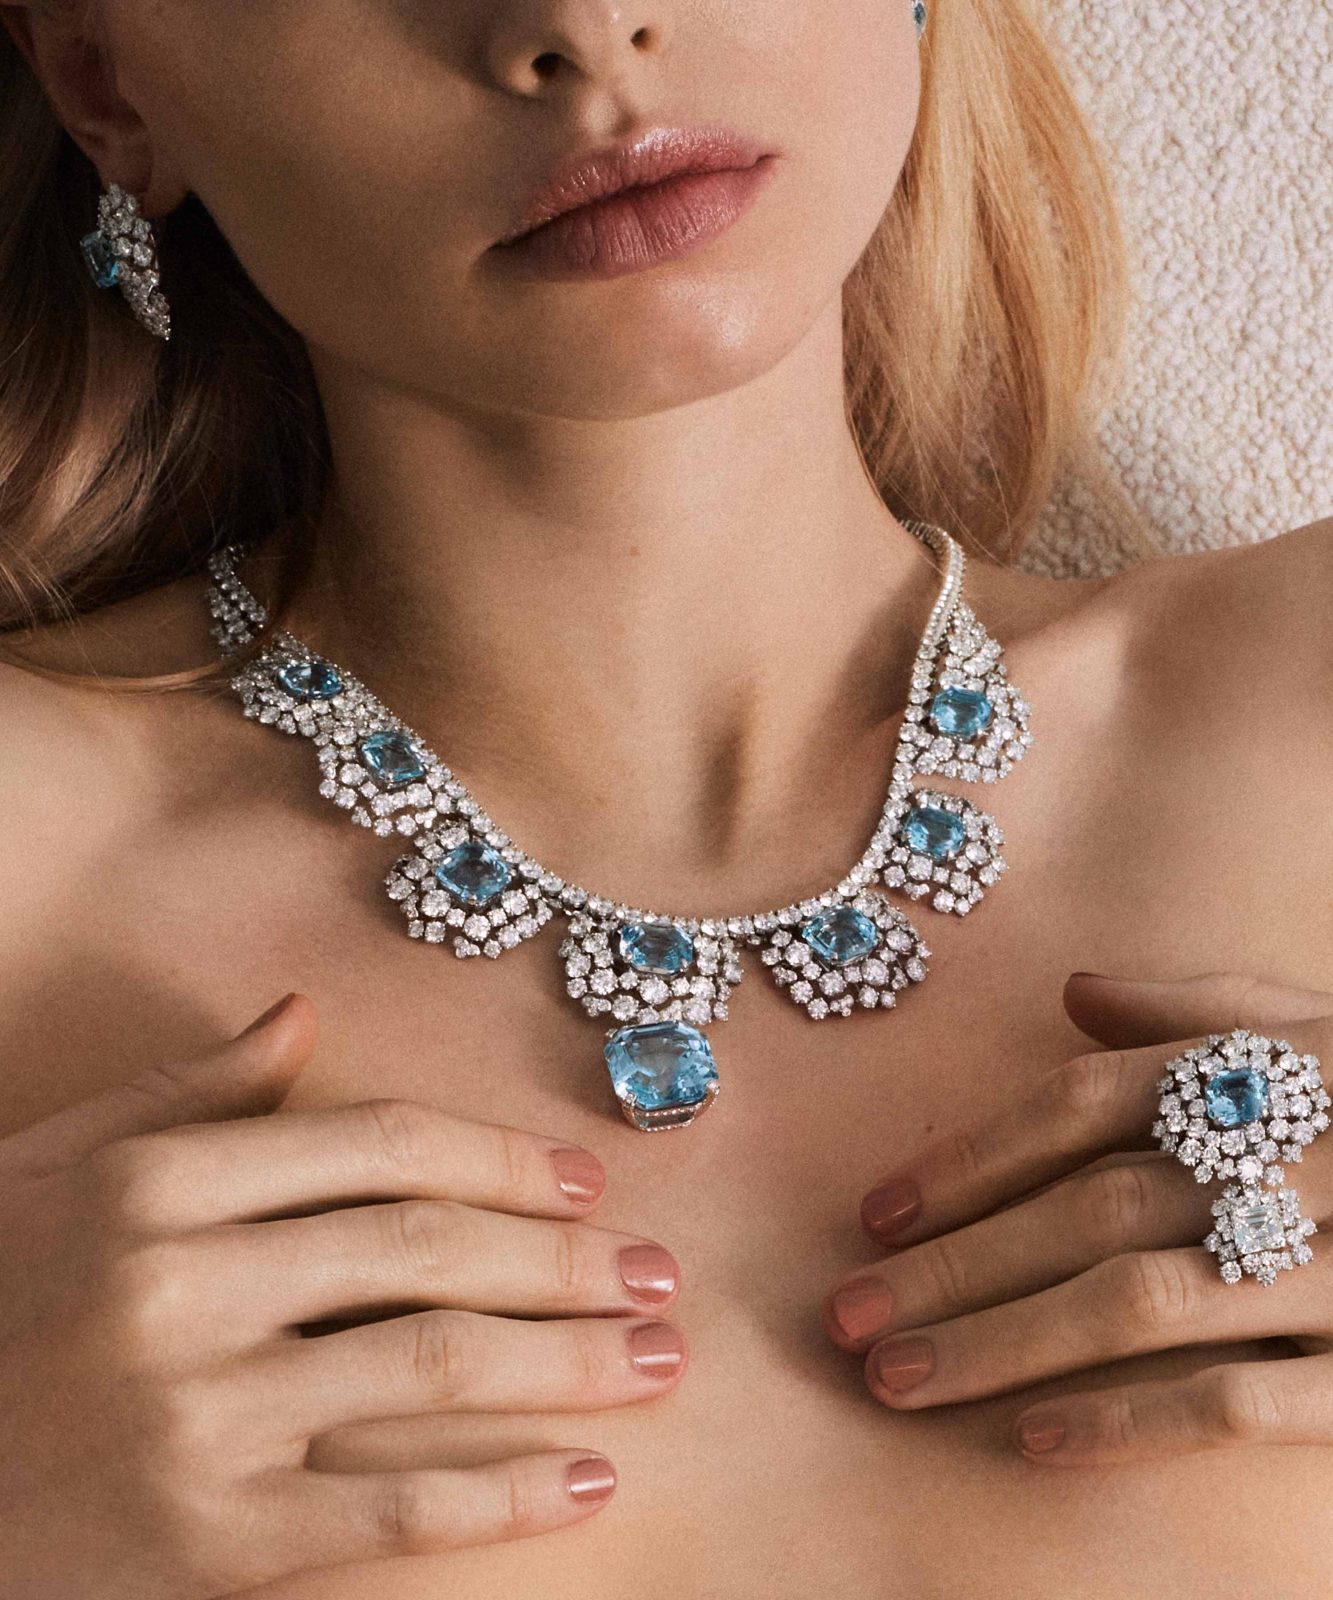 Tiffany & Co. showcases over 200 high jewelry designs from the Blue Book  Collection in the Middle East for the first time - Harmonies Magazine